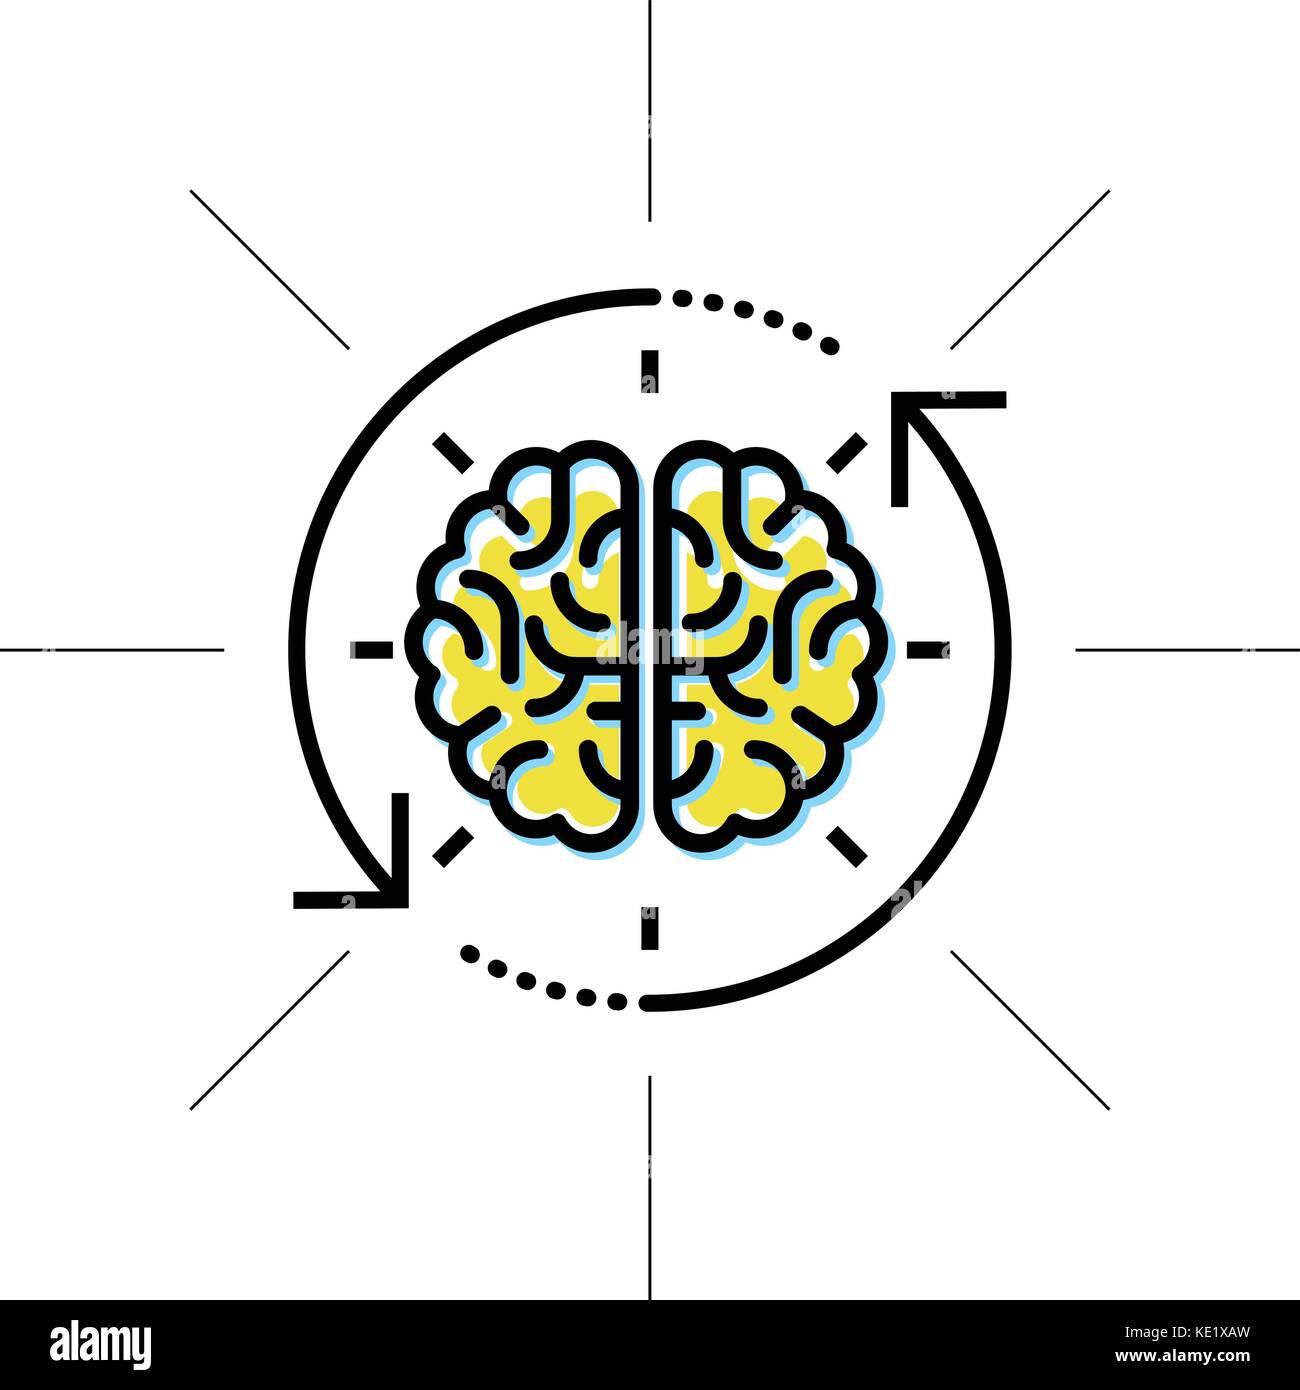 Brain in sight - intellect, research and knowledge concept Stock Vector